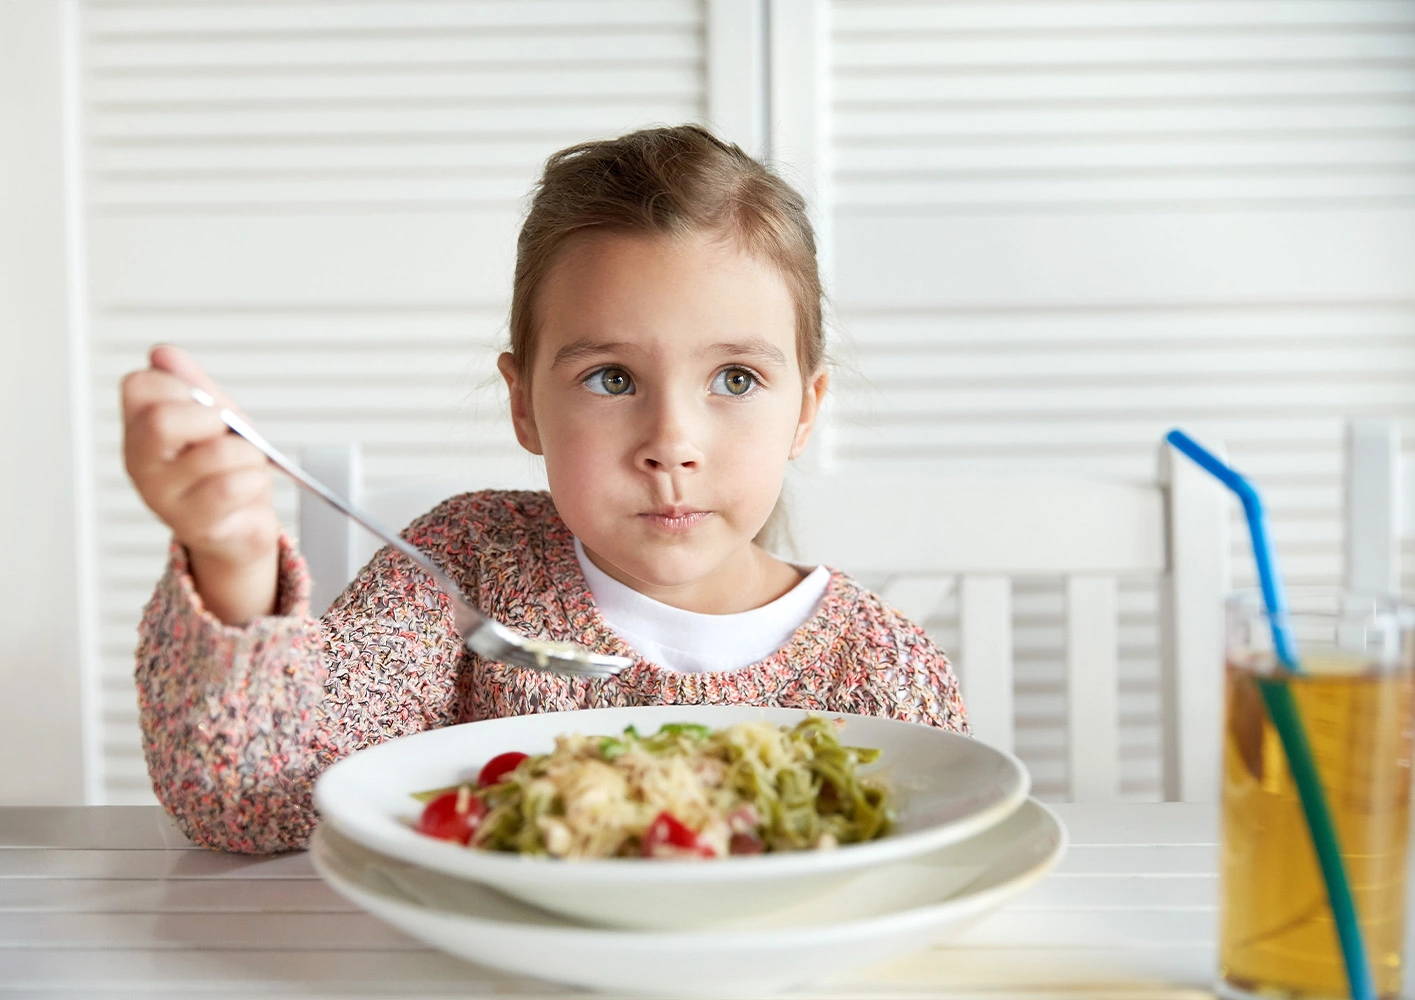 Dealing with dinner time challenges – our tips for picky eaters